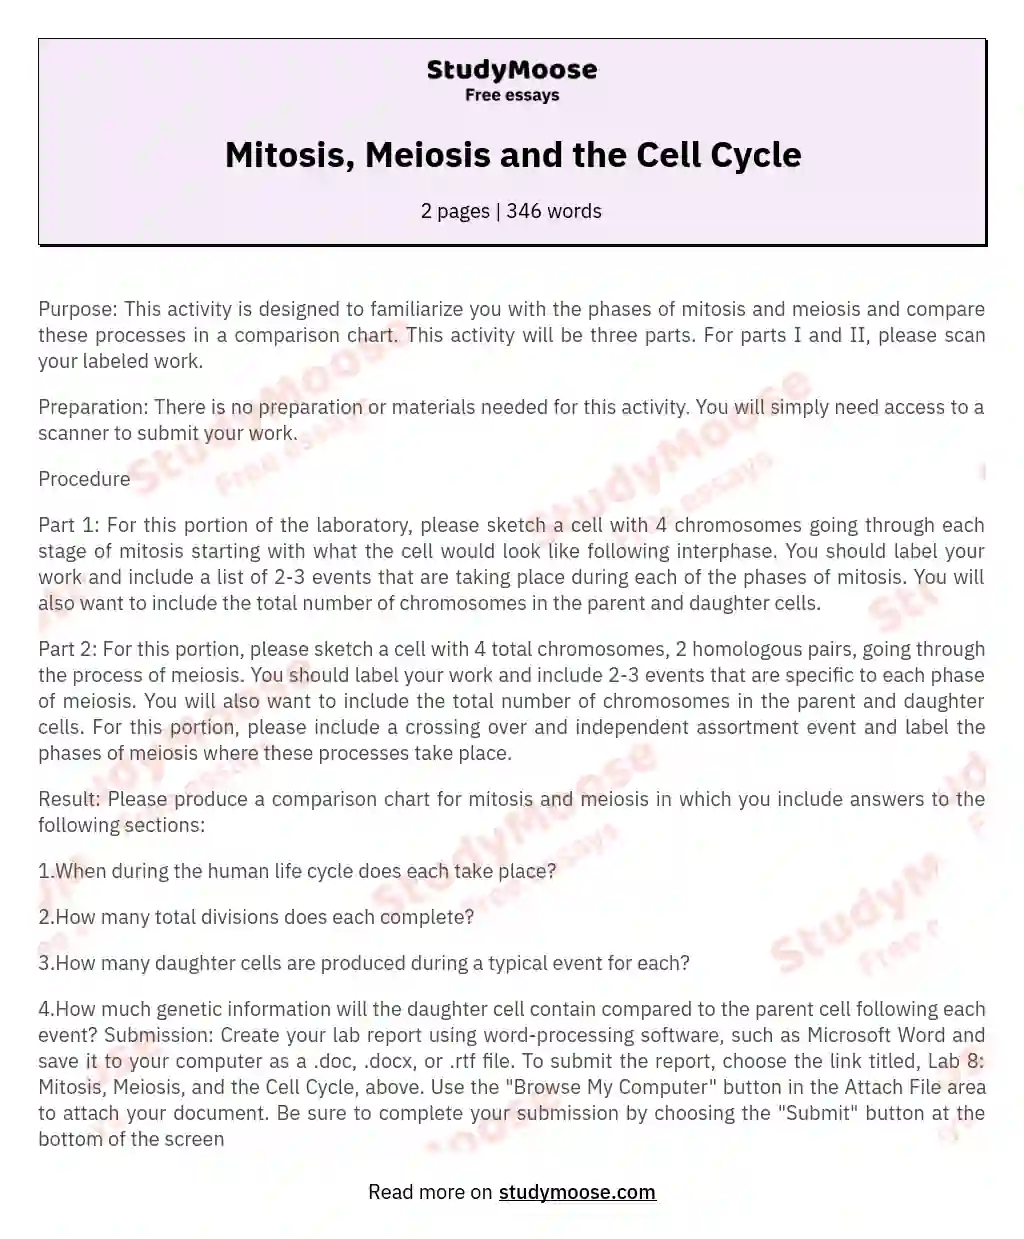 Mitosis, Meiosis and the Cell Cycle